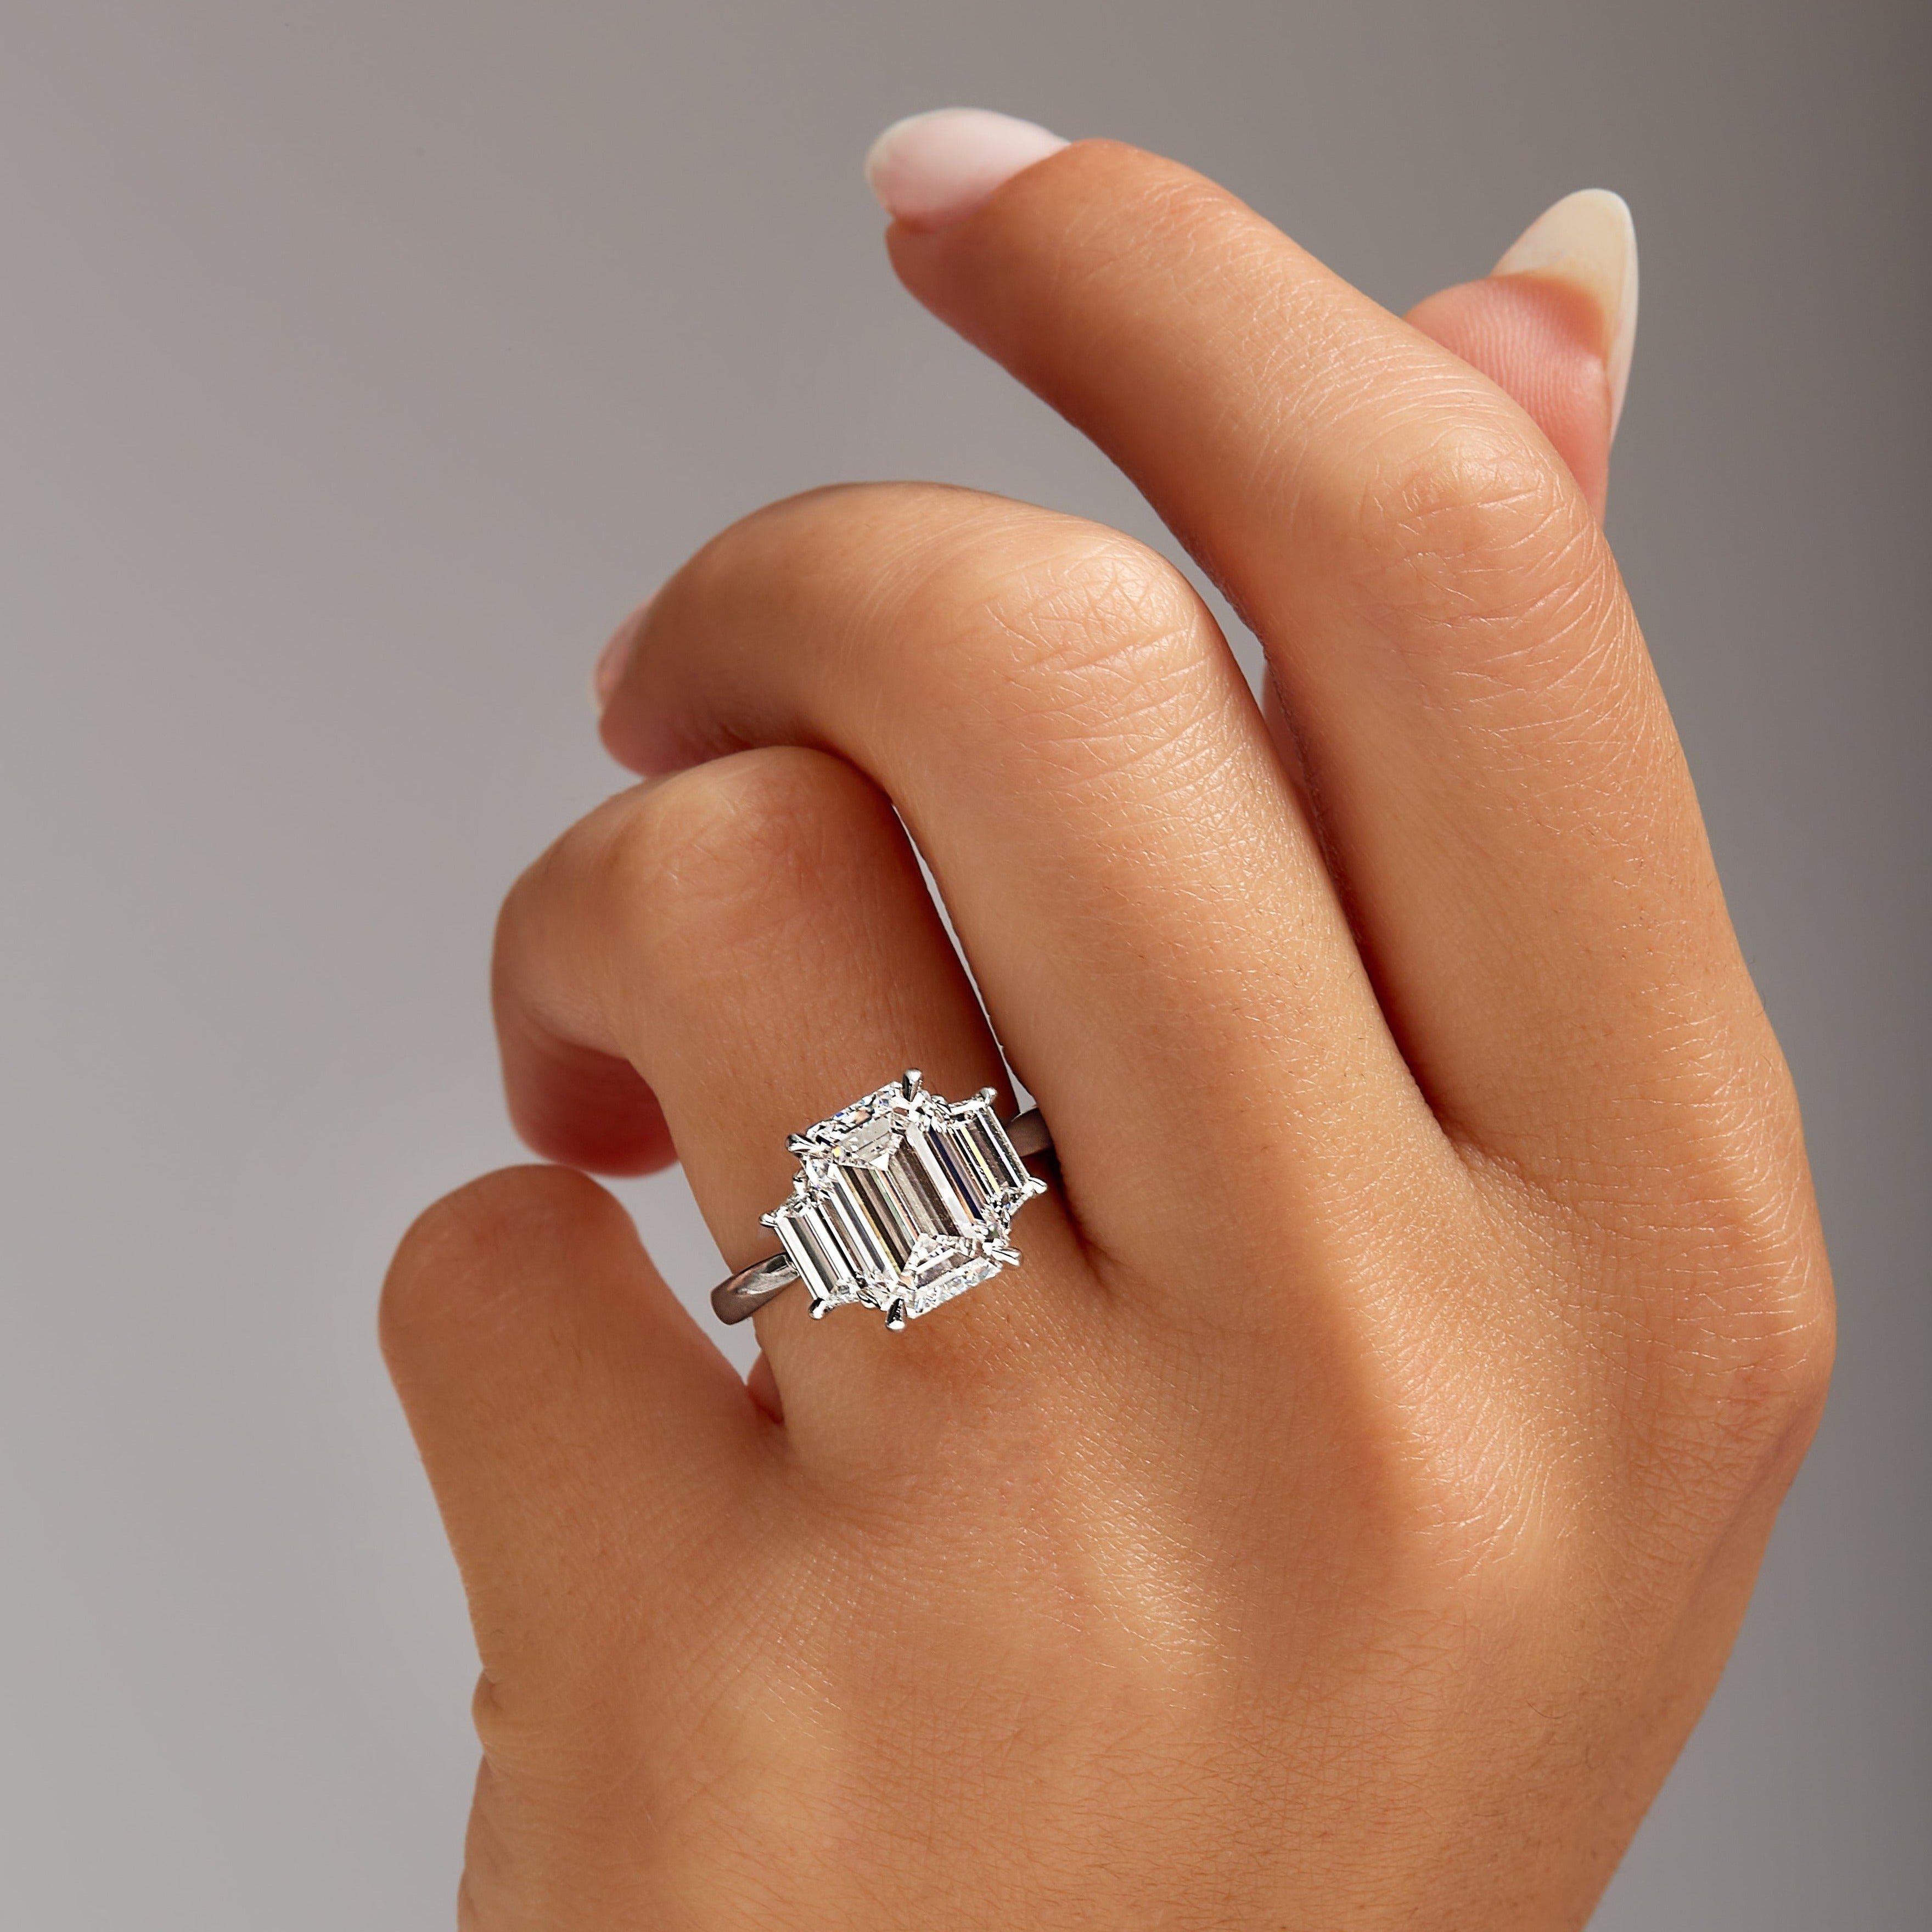 8.02ct Emerald Cut Diamond Three Stone Ring with Emerald Cut Side Stones in Platinum Band, GIA Certified